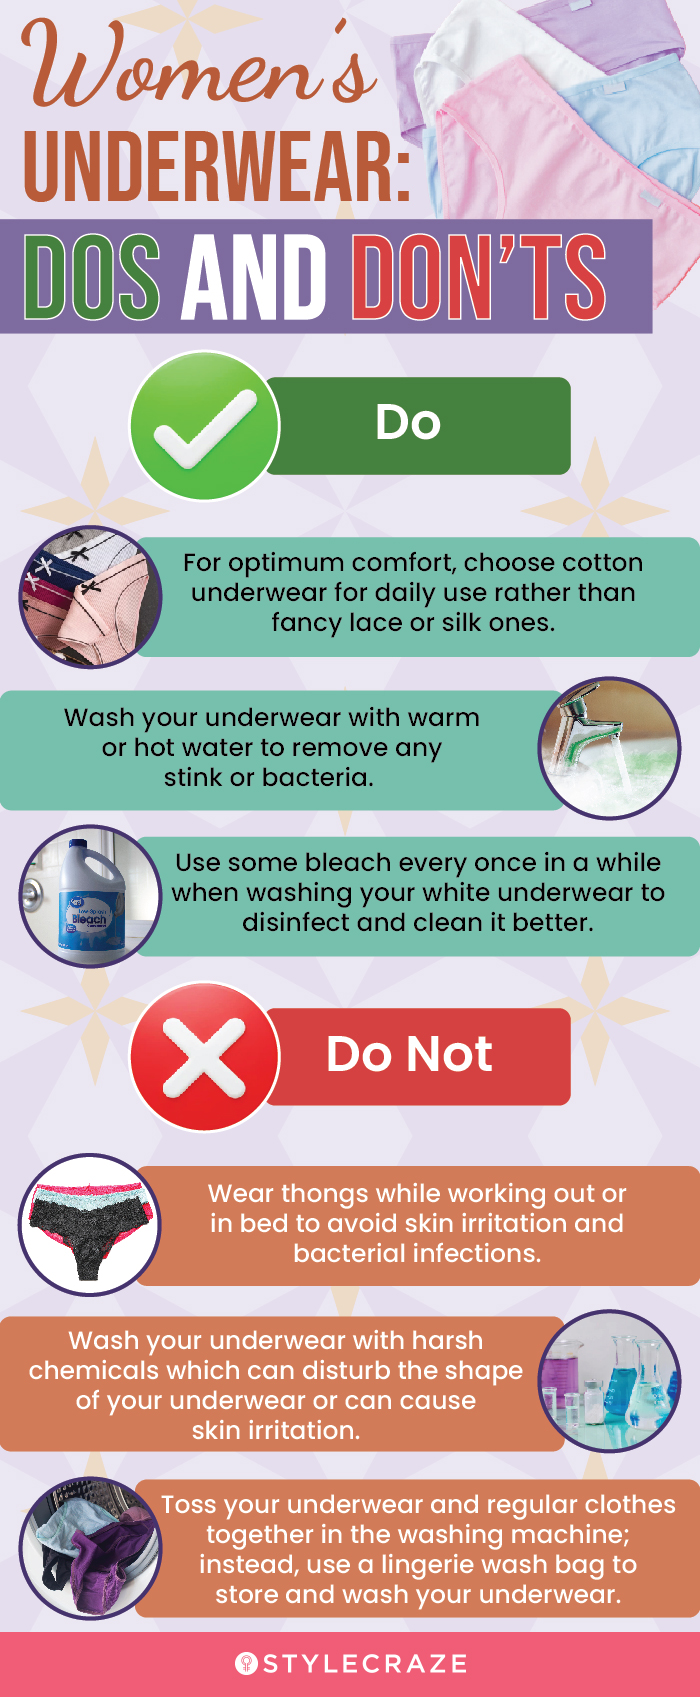 Women’s Underwear: Dos And Don’ts (infographic)